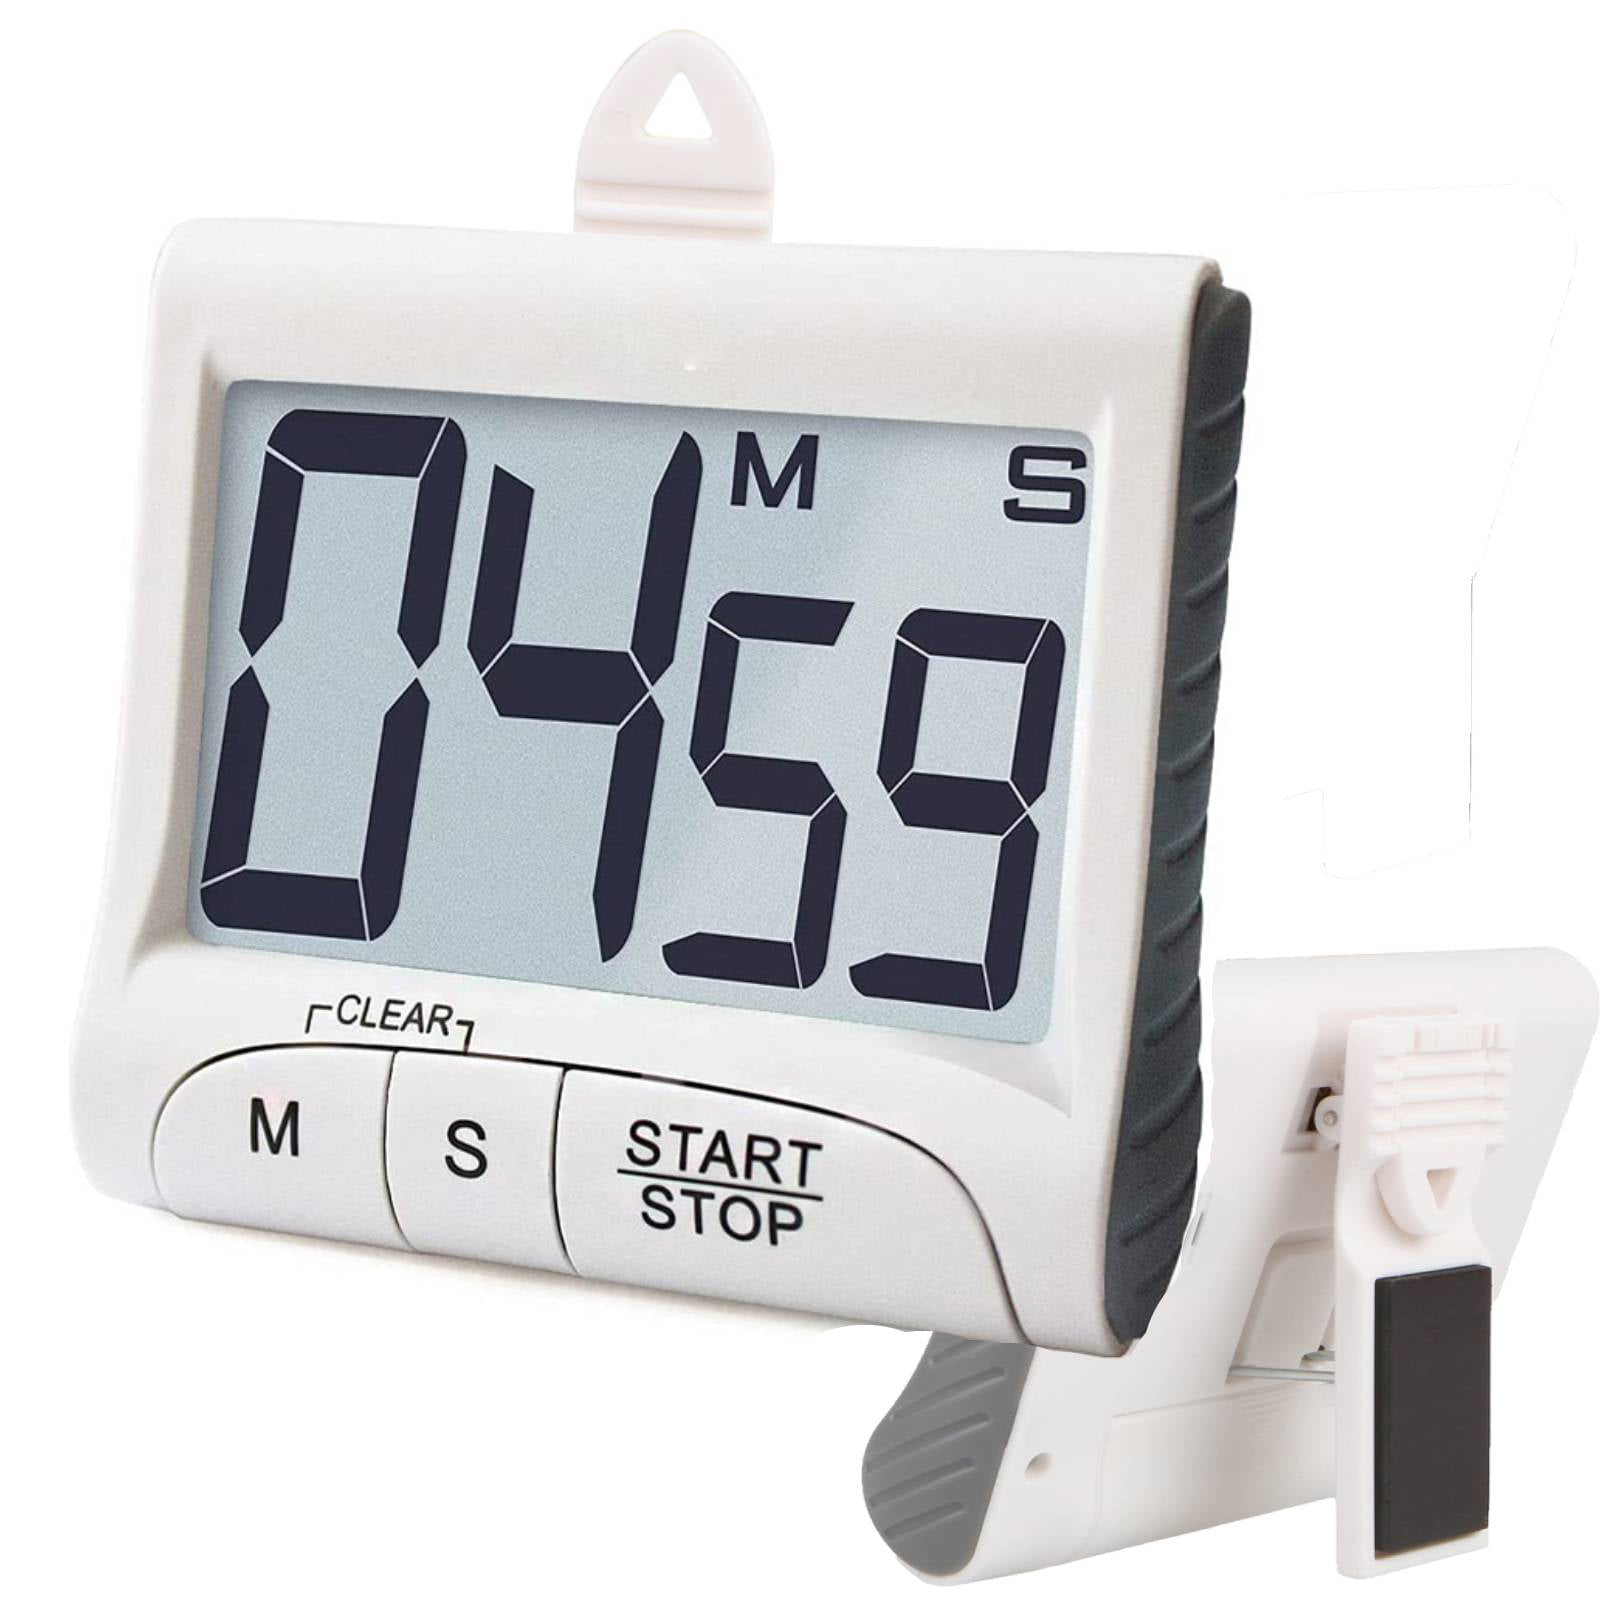 US Large LCD Digital Kitchen Egg Cooking Timer Count Down Clock Alarm Stopwatch